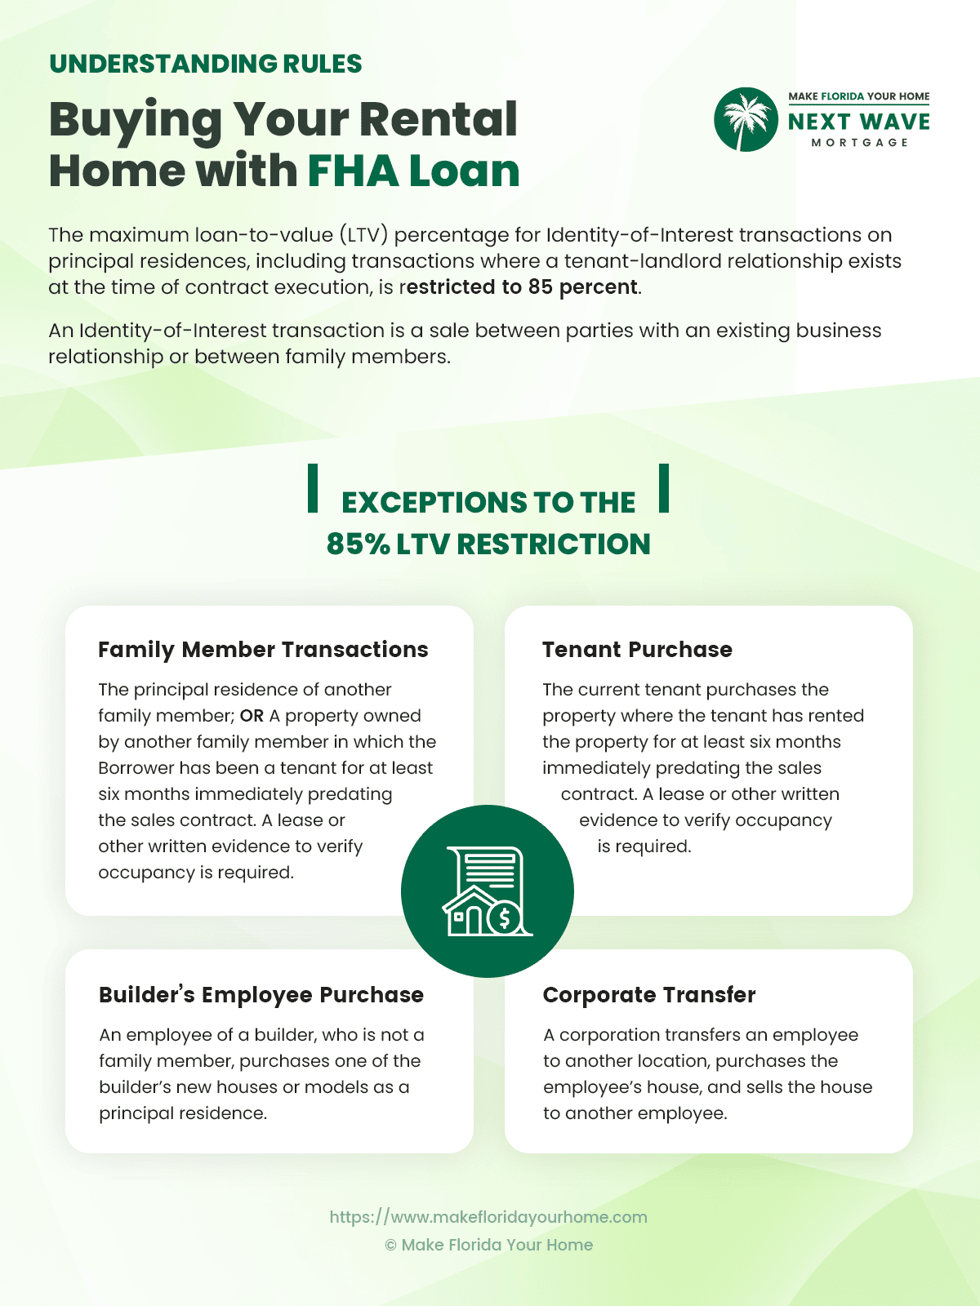 Understanding Rules - Buying Your Rental Home with FHA Loan - Infographic